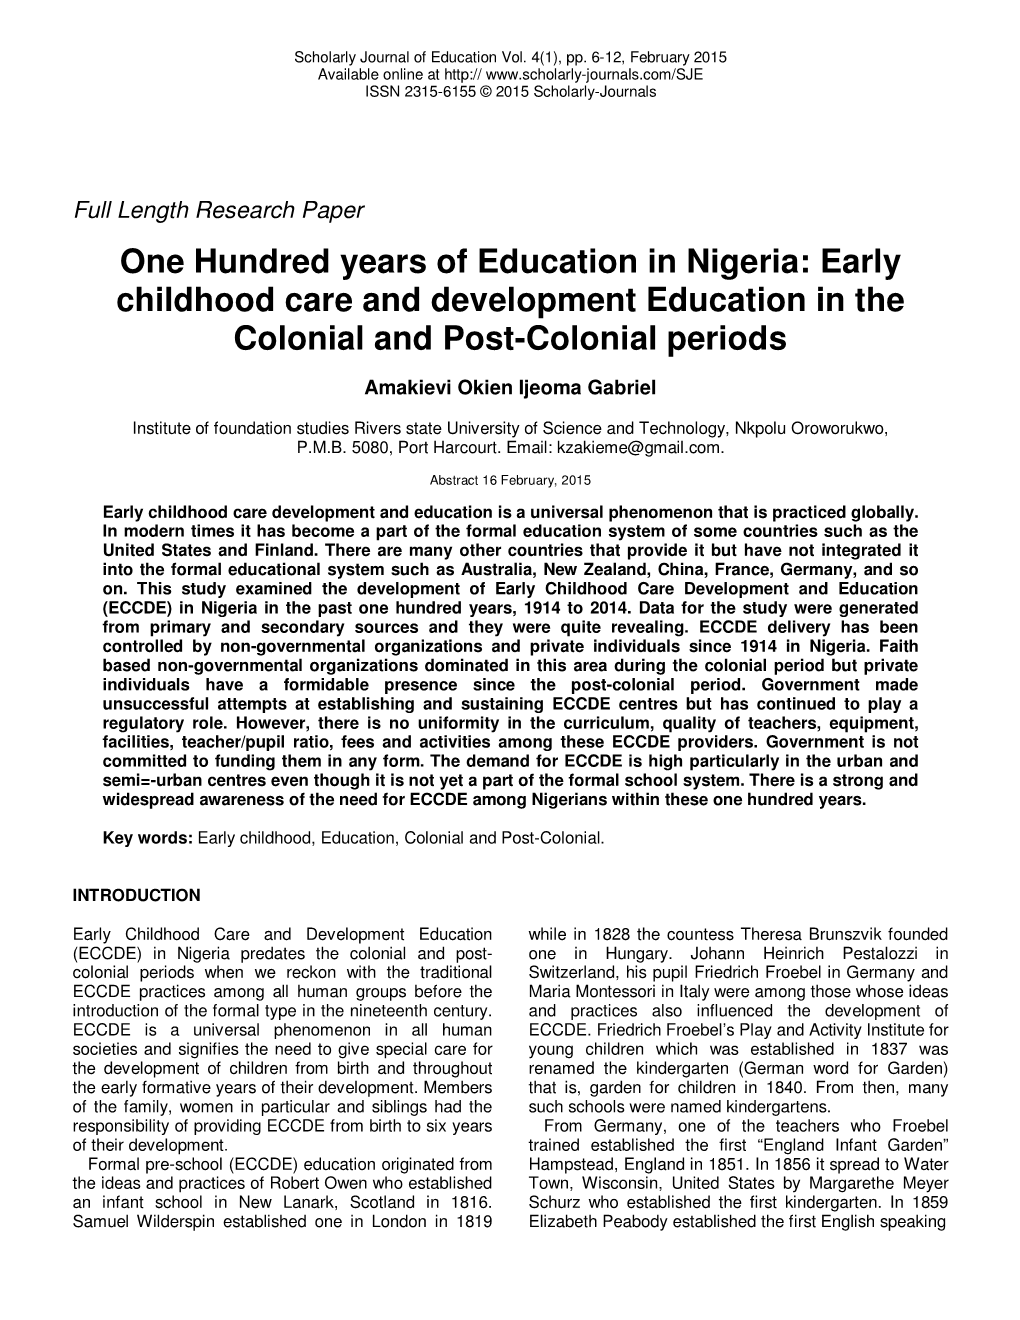 One Hundred Years of Education in Nigeria: Early Childhood Care and Development Education in the Colonial and Post-Colonial Periods